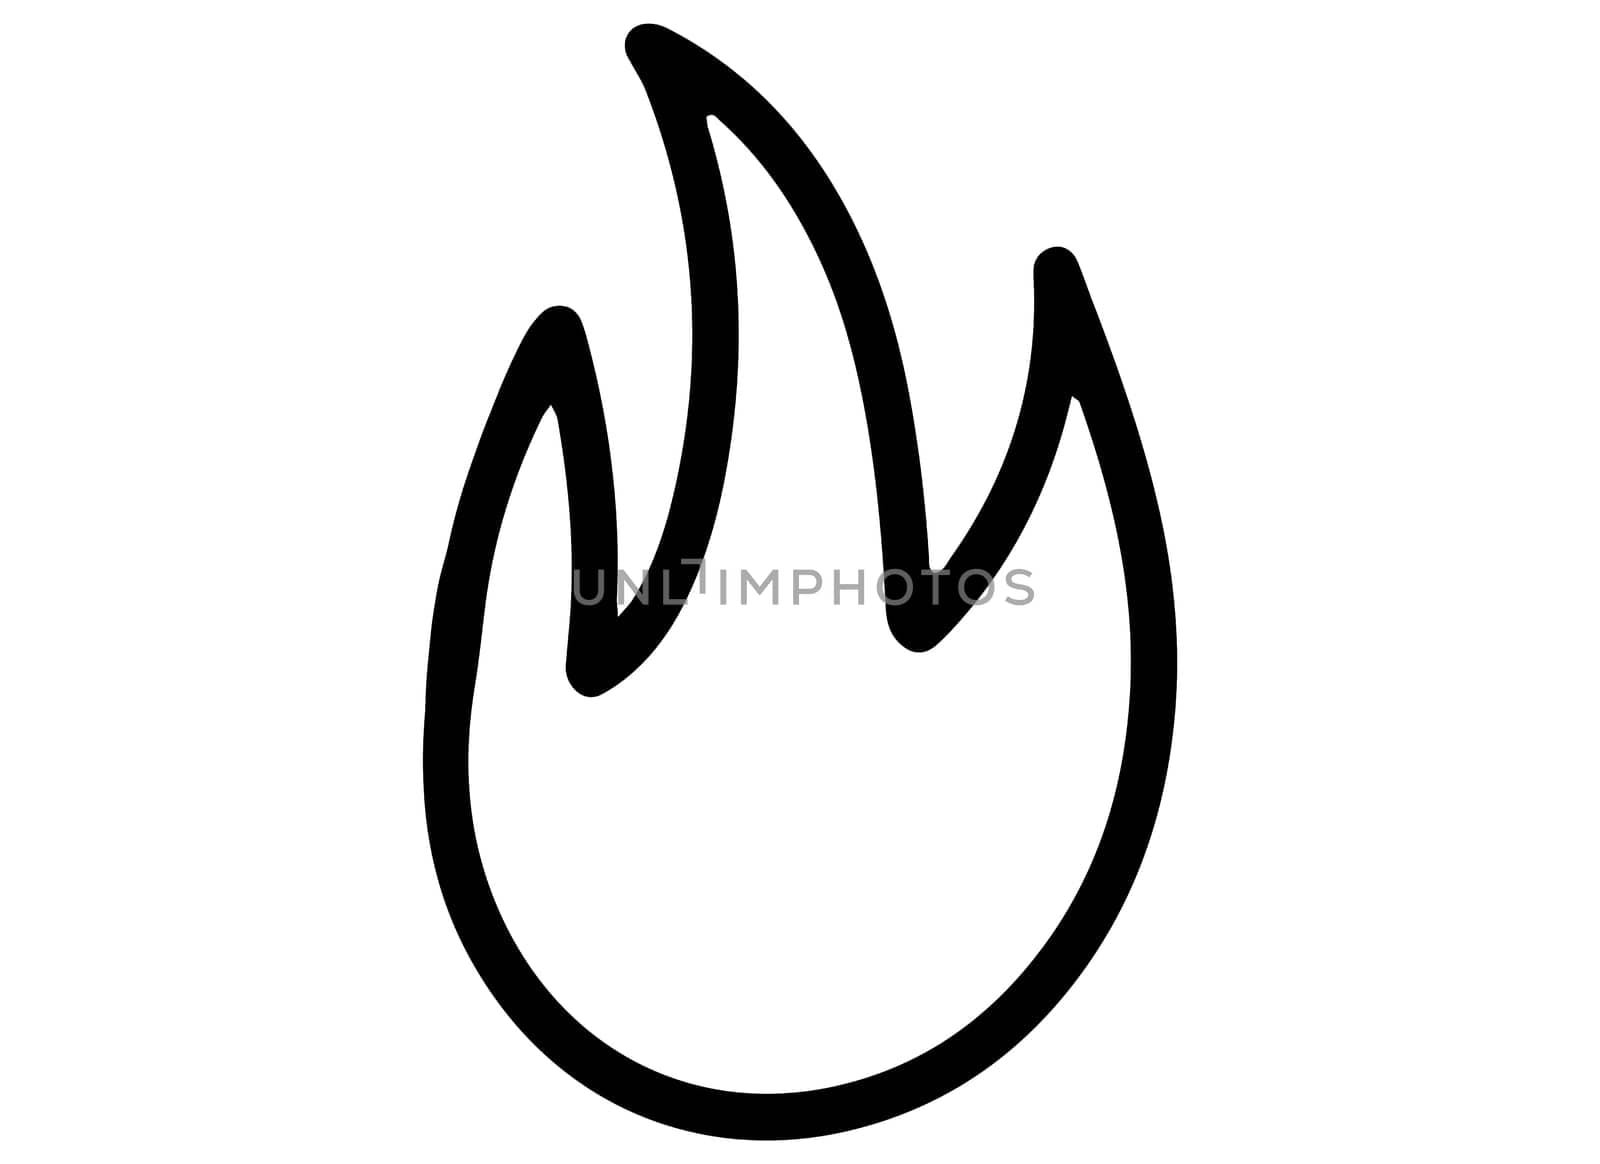 Printable Coloring Page for Kids. Black and White Fire Icon Isolated Illustration. by Rina_Dozornaya